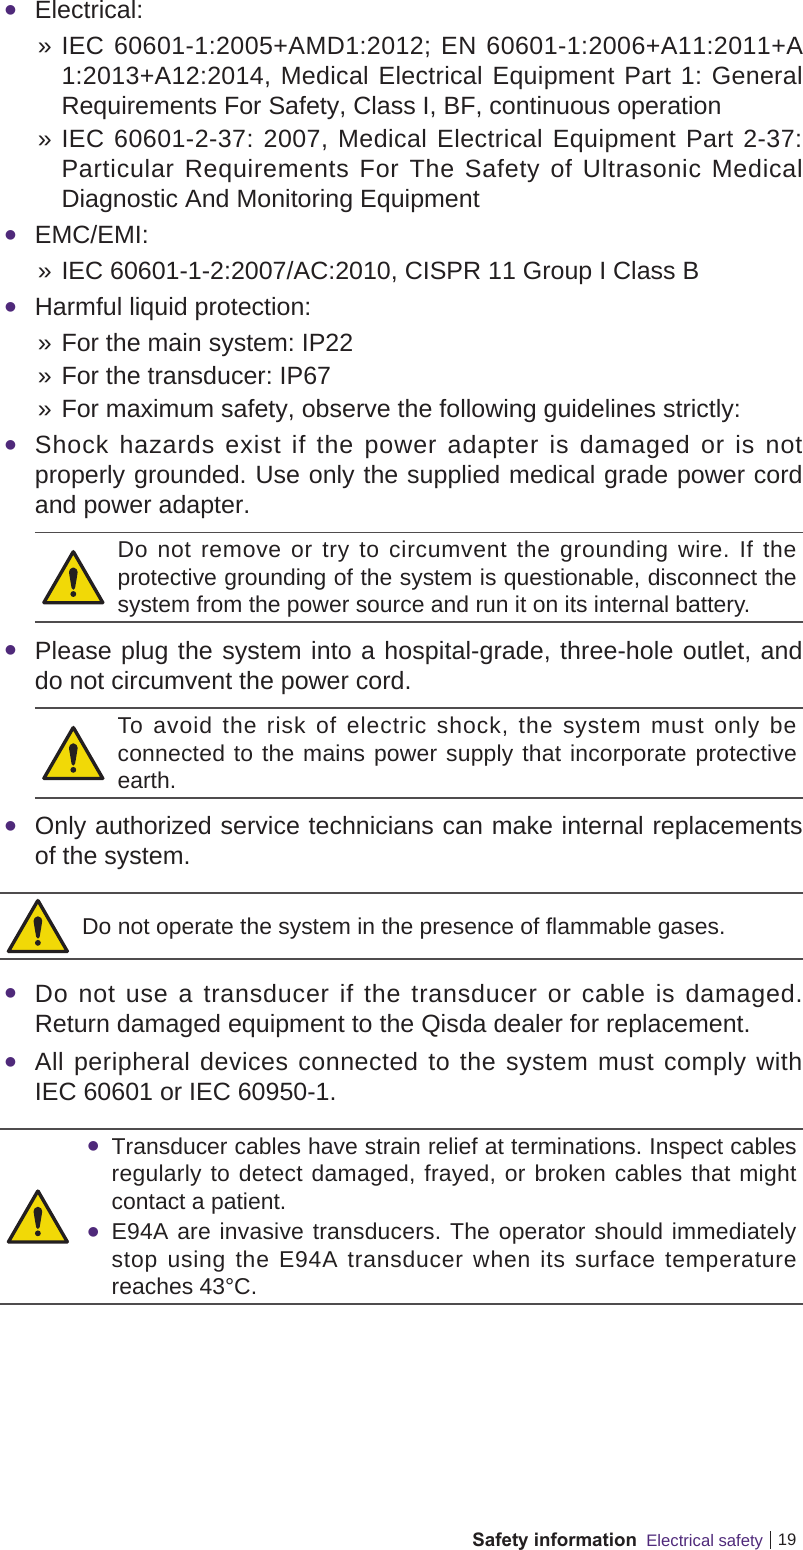 19Safety information  Electrical safety Electrical:  » IEC 60601-1:2005+AMD1:2012; EN 60601-1:2006+A11:2011+A1:2013+A12:2014, Medical Electrical Equipment Part 1: General Requirements For Safety, Class I, BF, continuous operation » IEC 60601-2-37: 2007, Medical Electrical Equipment Part 2-37: Particular Requirements For The Safety of Ultrasonic Medical Diagnostic And Monitoring Equipment EMC/EMI: » IEC 60601-1-2:2007/AC:2010, CISPR 11 Group I Class B Harmful liquid protection: » For the main system: IP22 » For the transducer: IP67 » For maximum safety, observe the following guidelines strictly: Shock hazards exist if the power adapter is damaged or is not properly grounded. Use only the supplied medical grade power cord and power adapter.Do not remove or try to circumvent the grounding wire. If the protective grounding of the system is questionable, disconnect the system from the power source and run it on its internal battery. Please plug the system into a hospital-grade, three-hole outlet, and do not circumvent the power cord.To avoid the risk of electric shock, the system must only be connected to the mains power supply that incorporate protective earth. Only authorized service technicians can make internal replacements of the system.Do not operate the system in the presence of flammable gases. Do not use a transducer if the transducer or cable is damaged. Return damaged equipment to the Qisda dealer for replacement. All peripheral devices connected to the system must comply with IEC 60601 or IEC 60950-1. Transducer cables have strain relief at terminations. Inspect cables regularly to detect damaged, frayed, or broken cables that might contact a patient. E94A are invasive transducers. The operator should immediately stop using the E94A transducer when its surface temperature reaches 43°C.